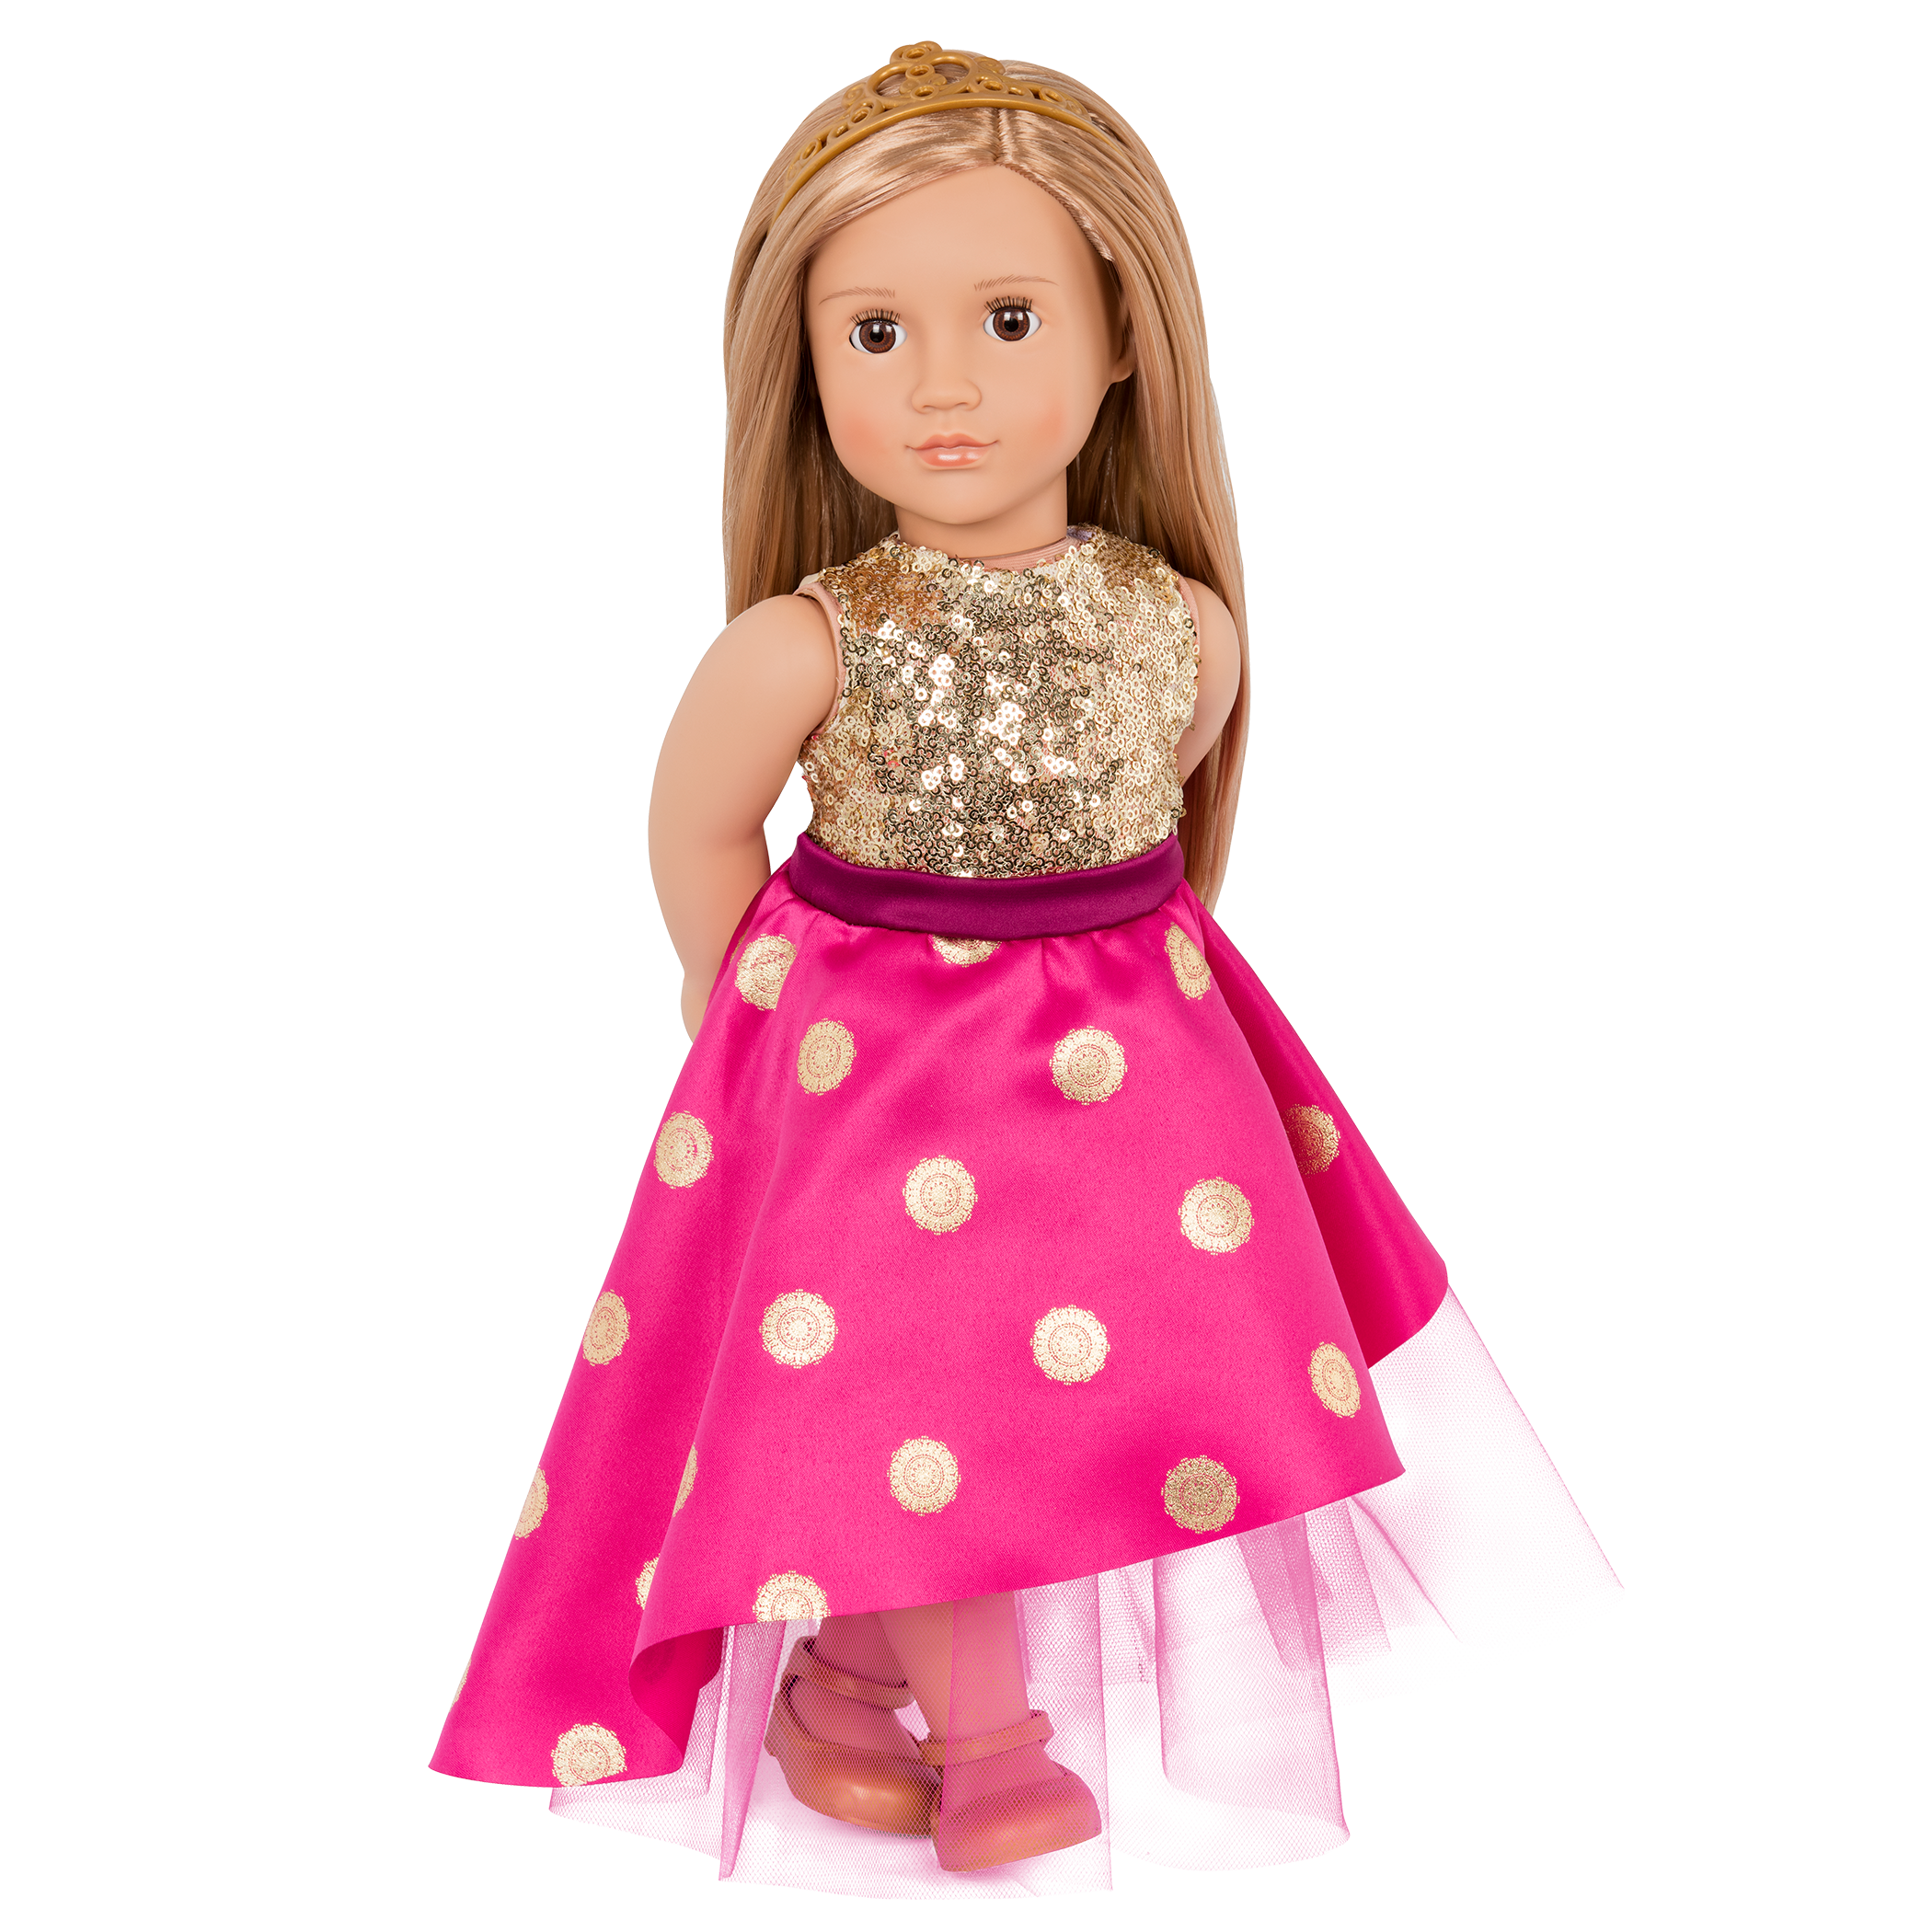 18-inch doll with blonde hair and brown eyes